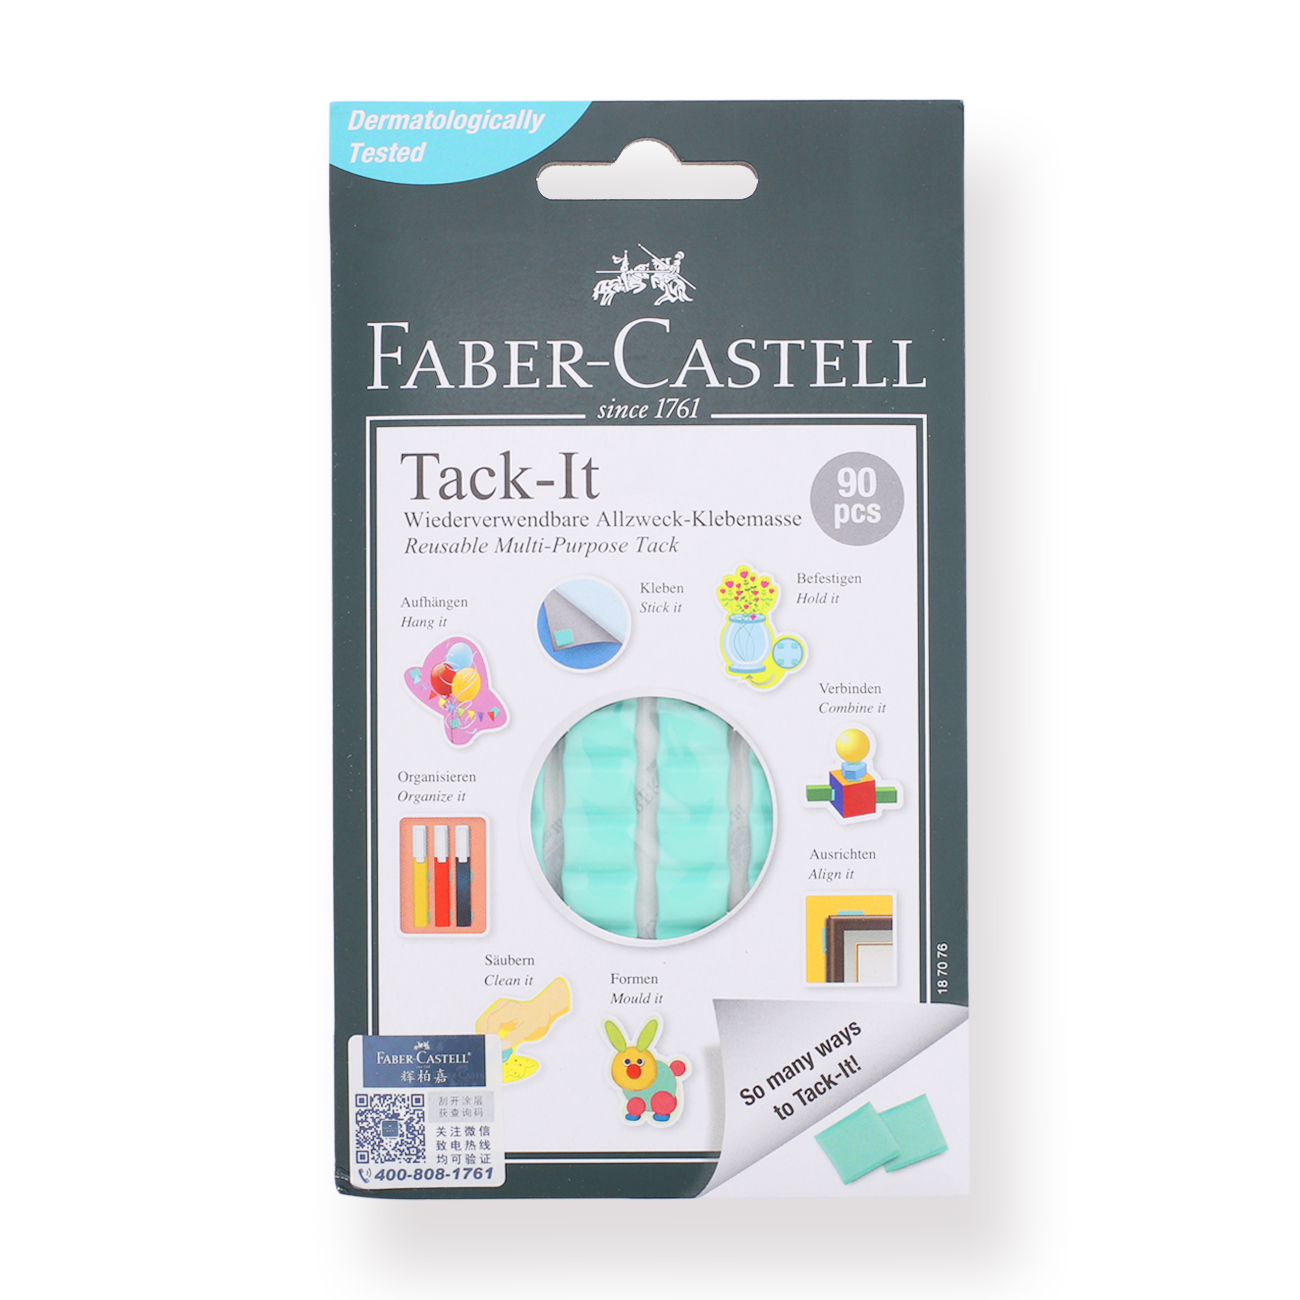 Faber Castell Adhesive Tack-It Multipurpose Reusable/Removable for  Home/School Wall Sticky Putty Non-Toxic